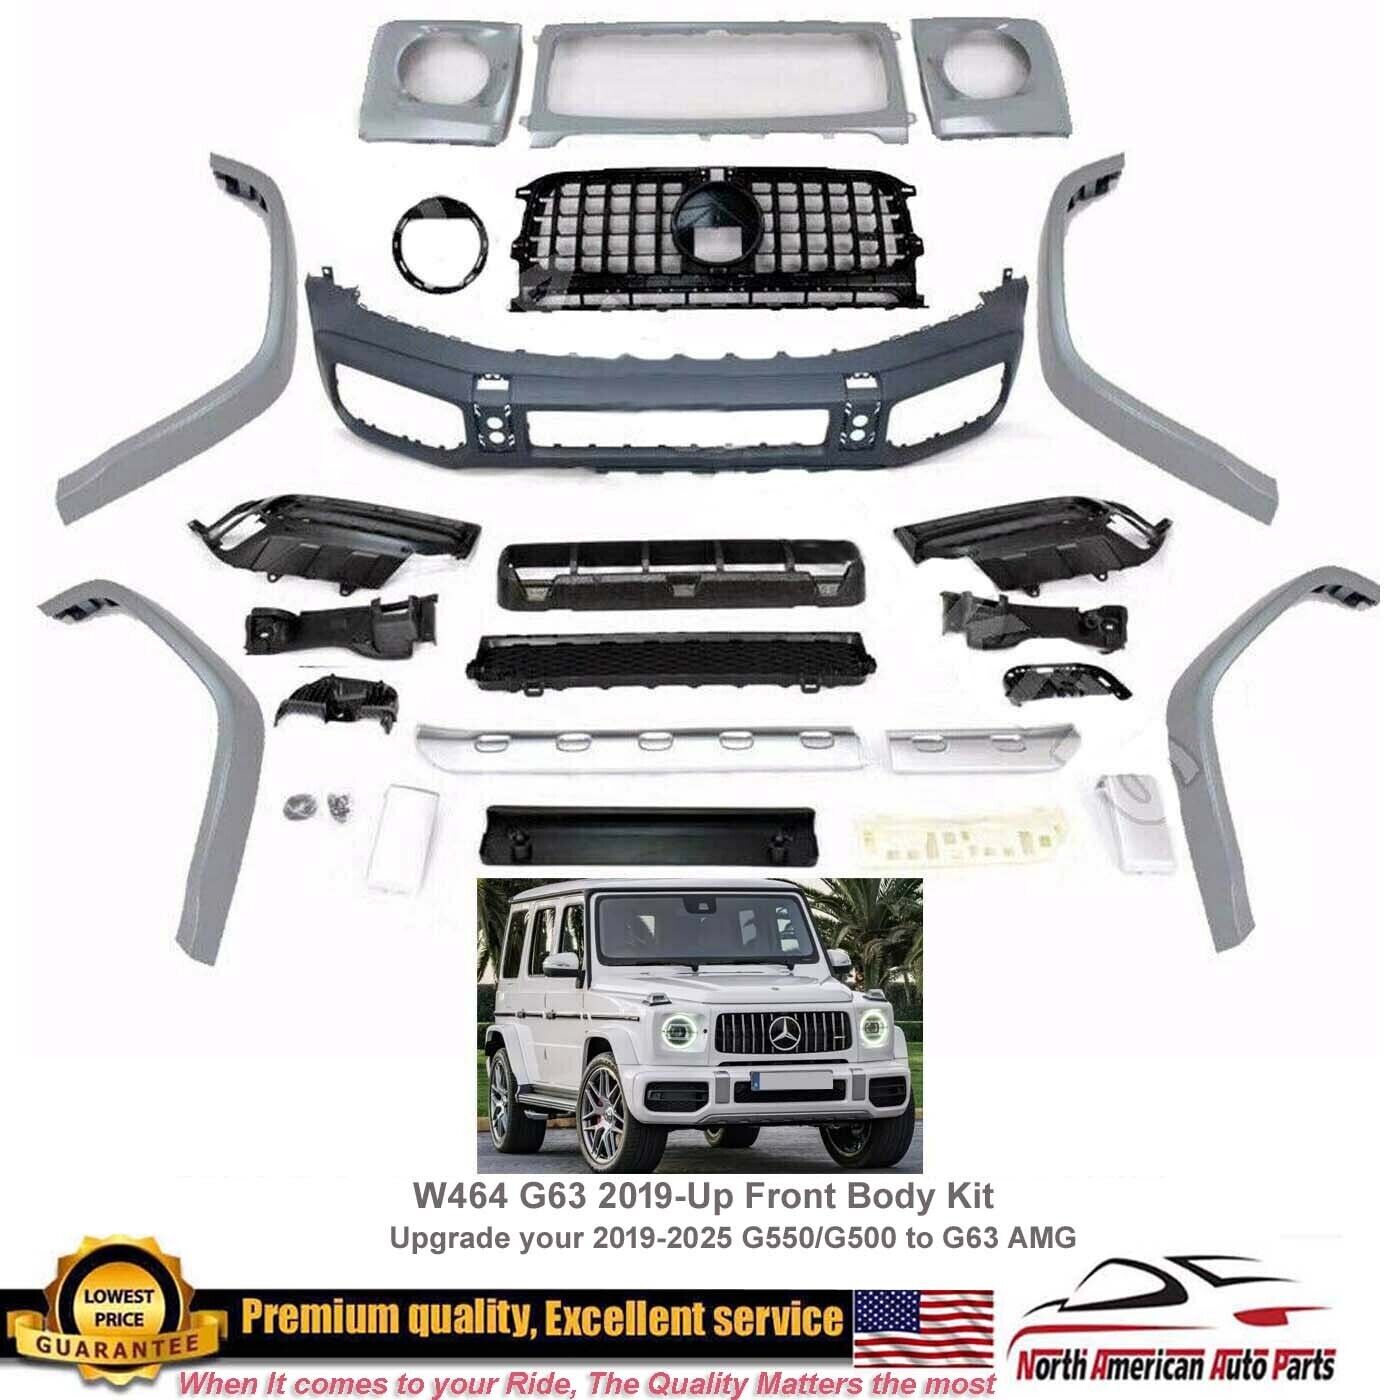 2019-2025 G63 AMG Style Body Kit Bumper Upgrade for W464 G500 G550